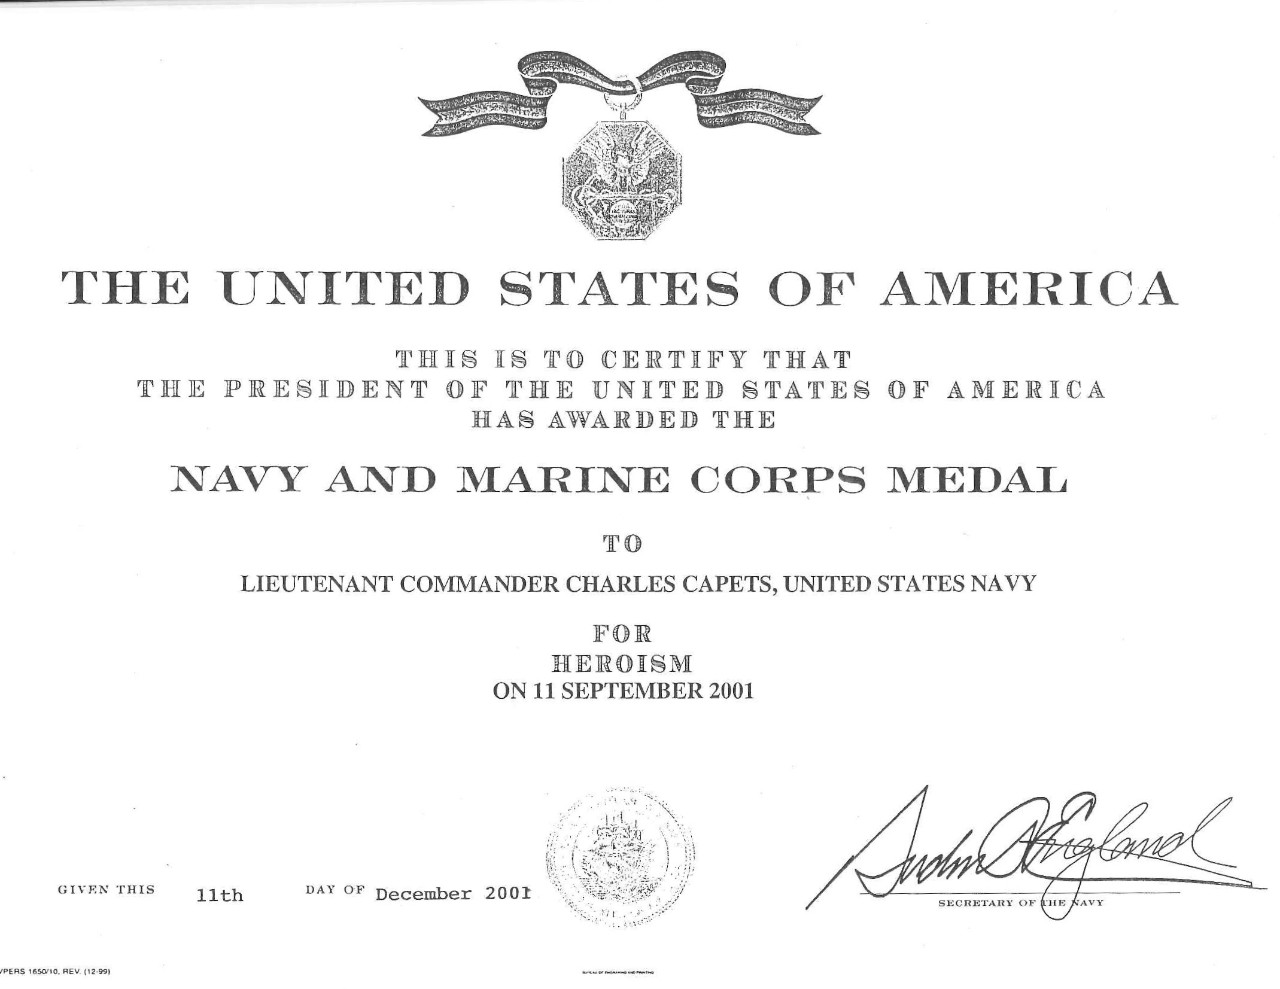 Capets, Chuck LCDR Navy and Marine Corps Medal